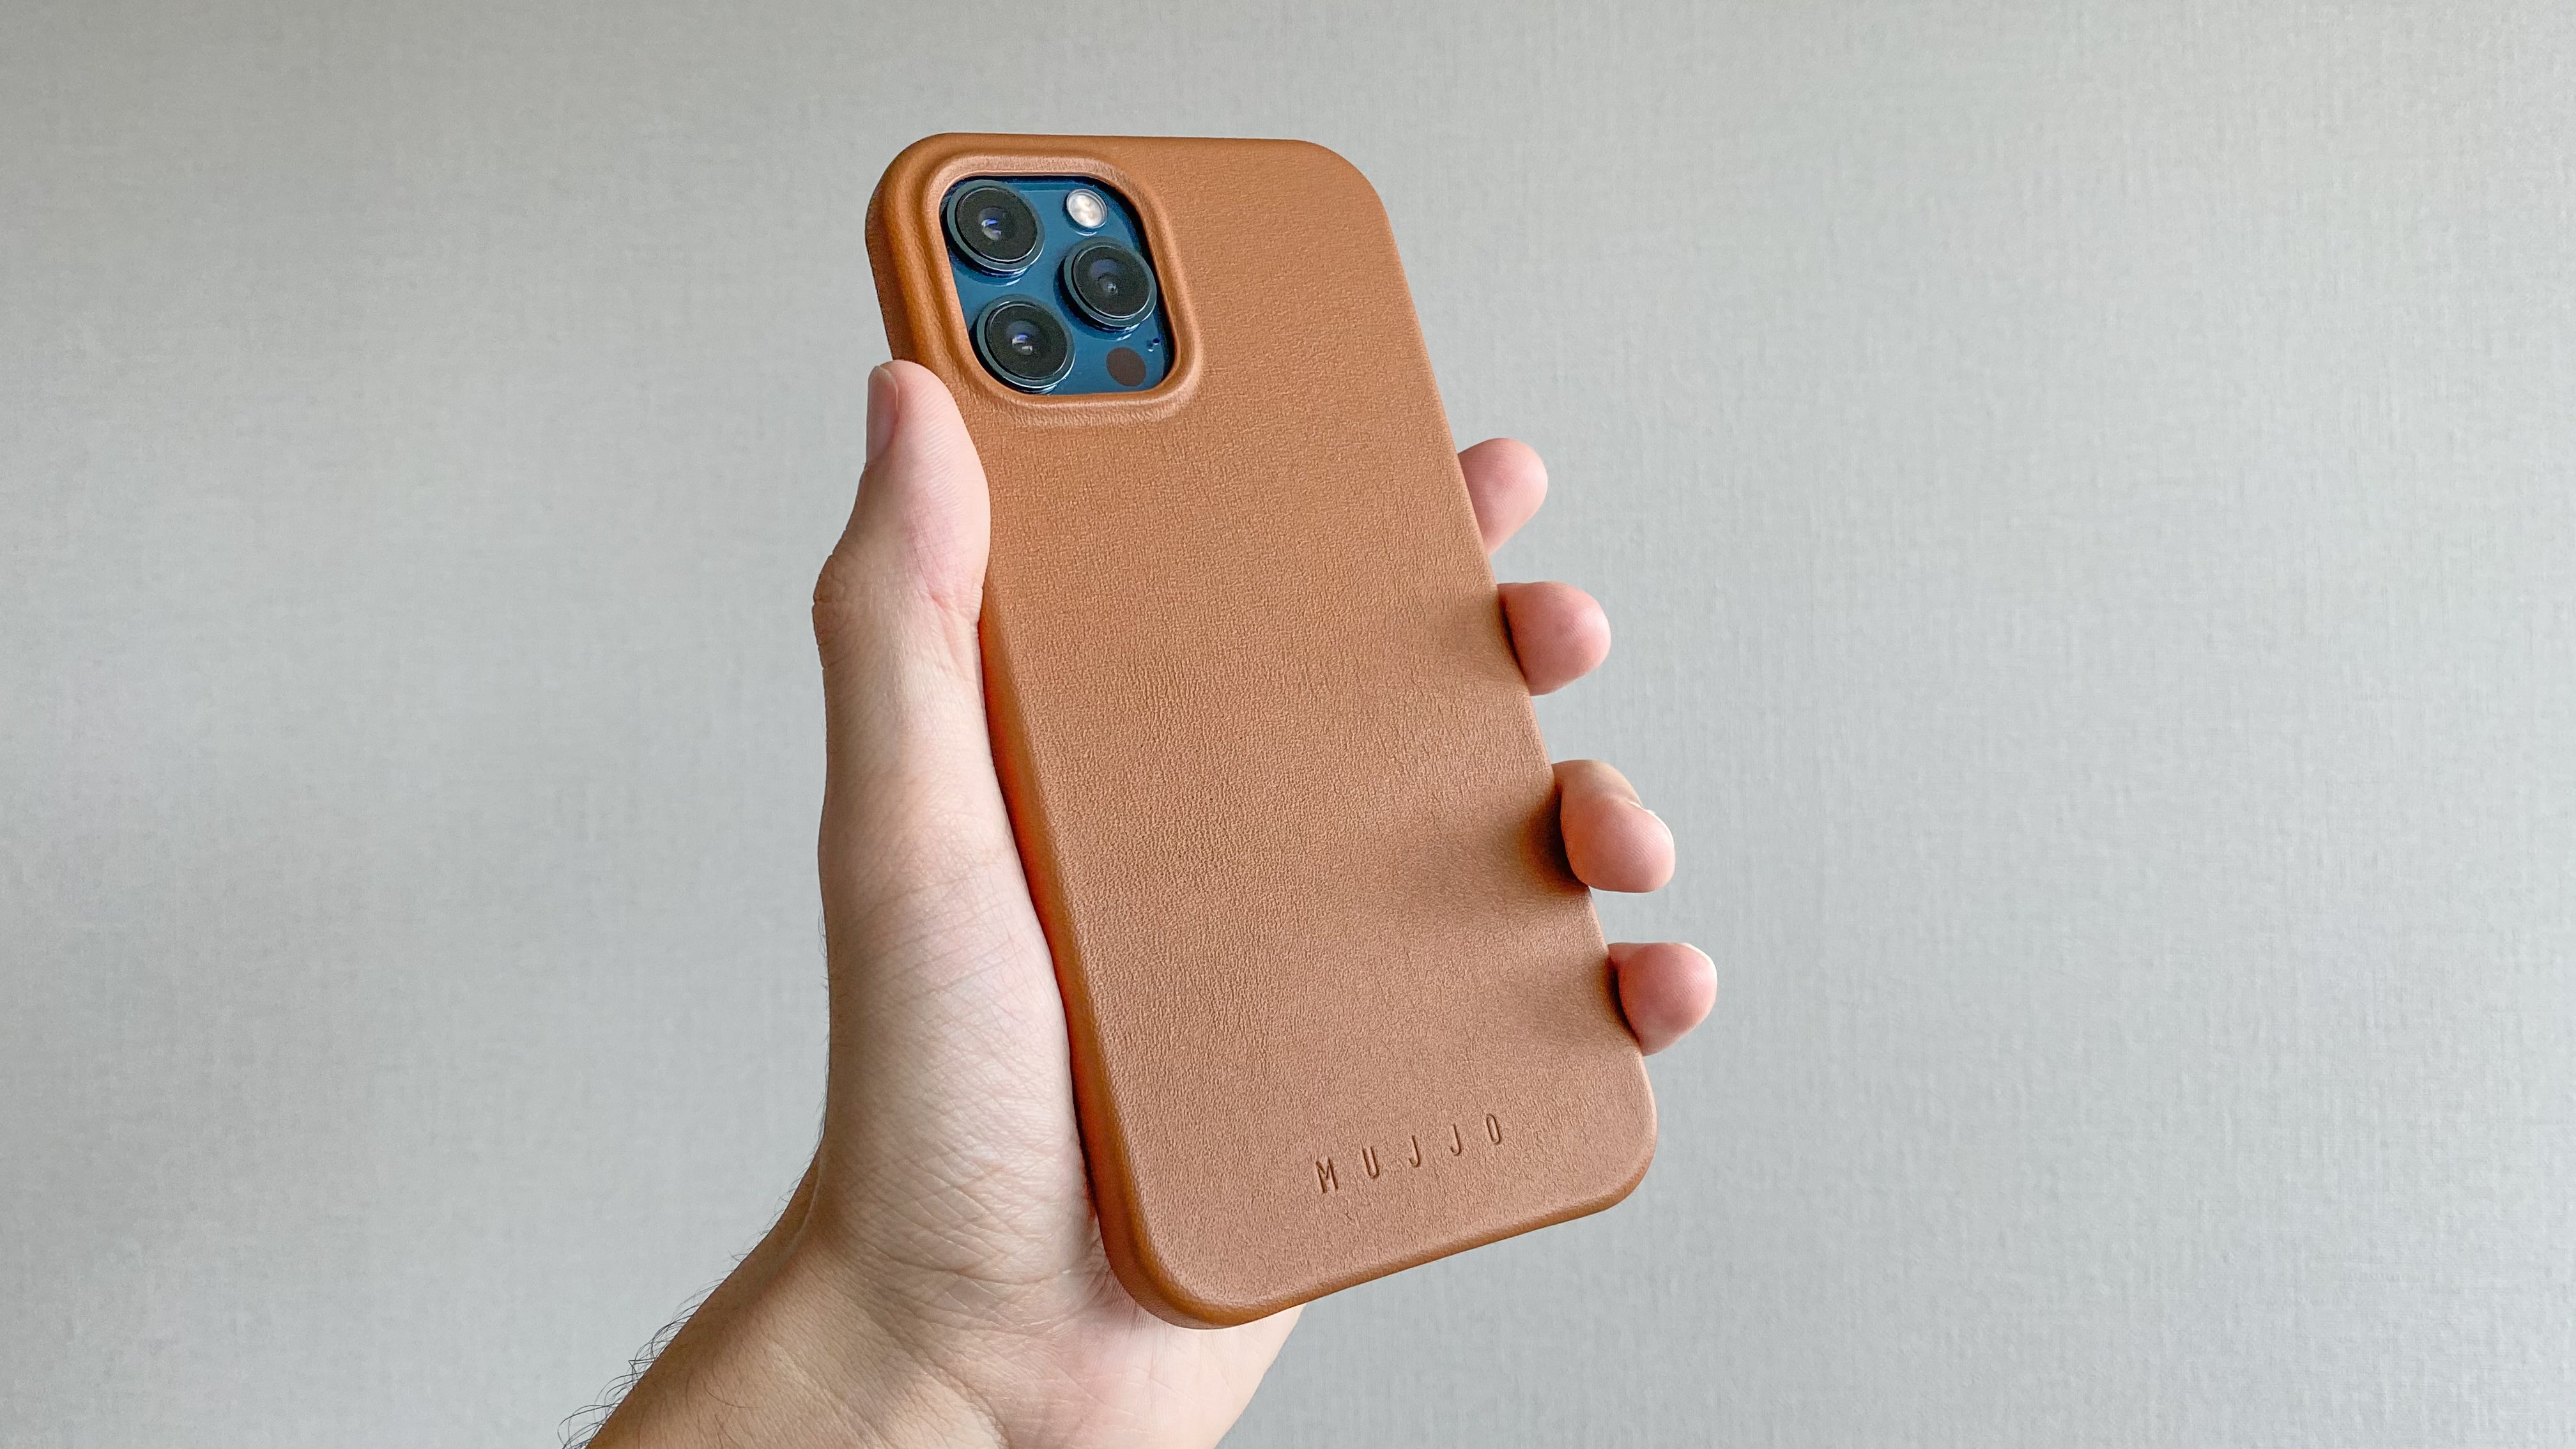 Mujjo S Leather Iphone 12 Cases Are A Great Alternative To Apple S Official Cases 9to5mac